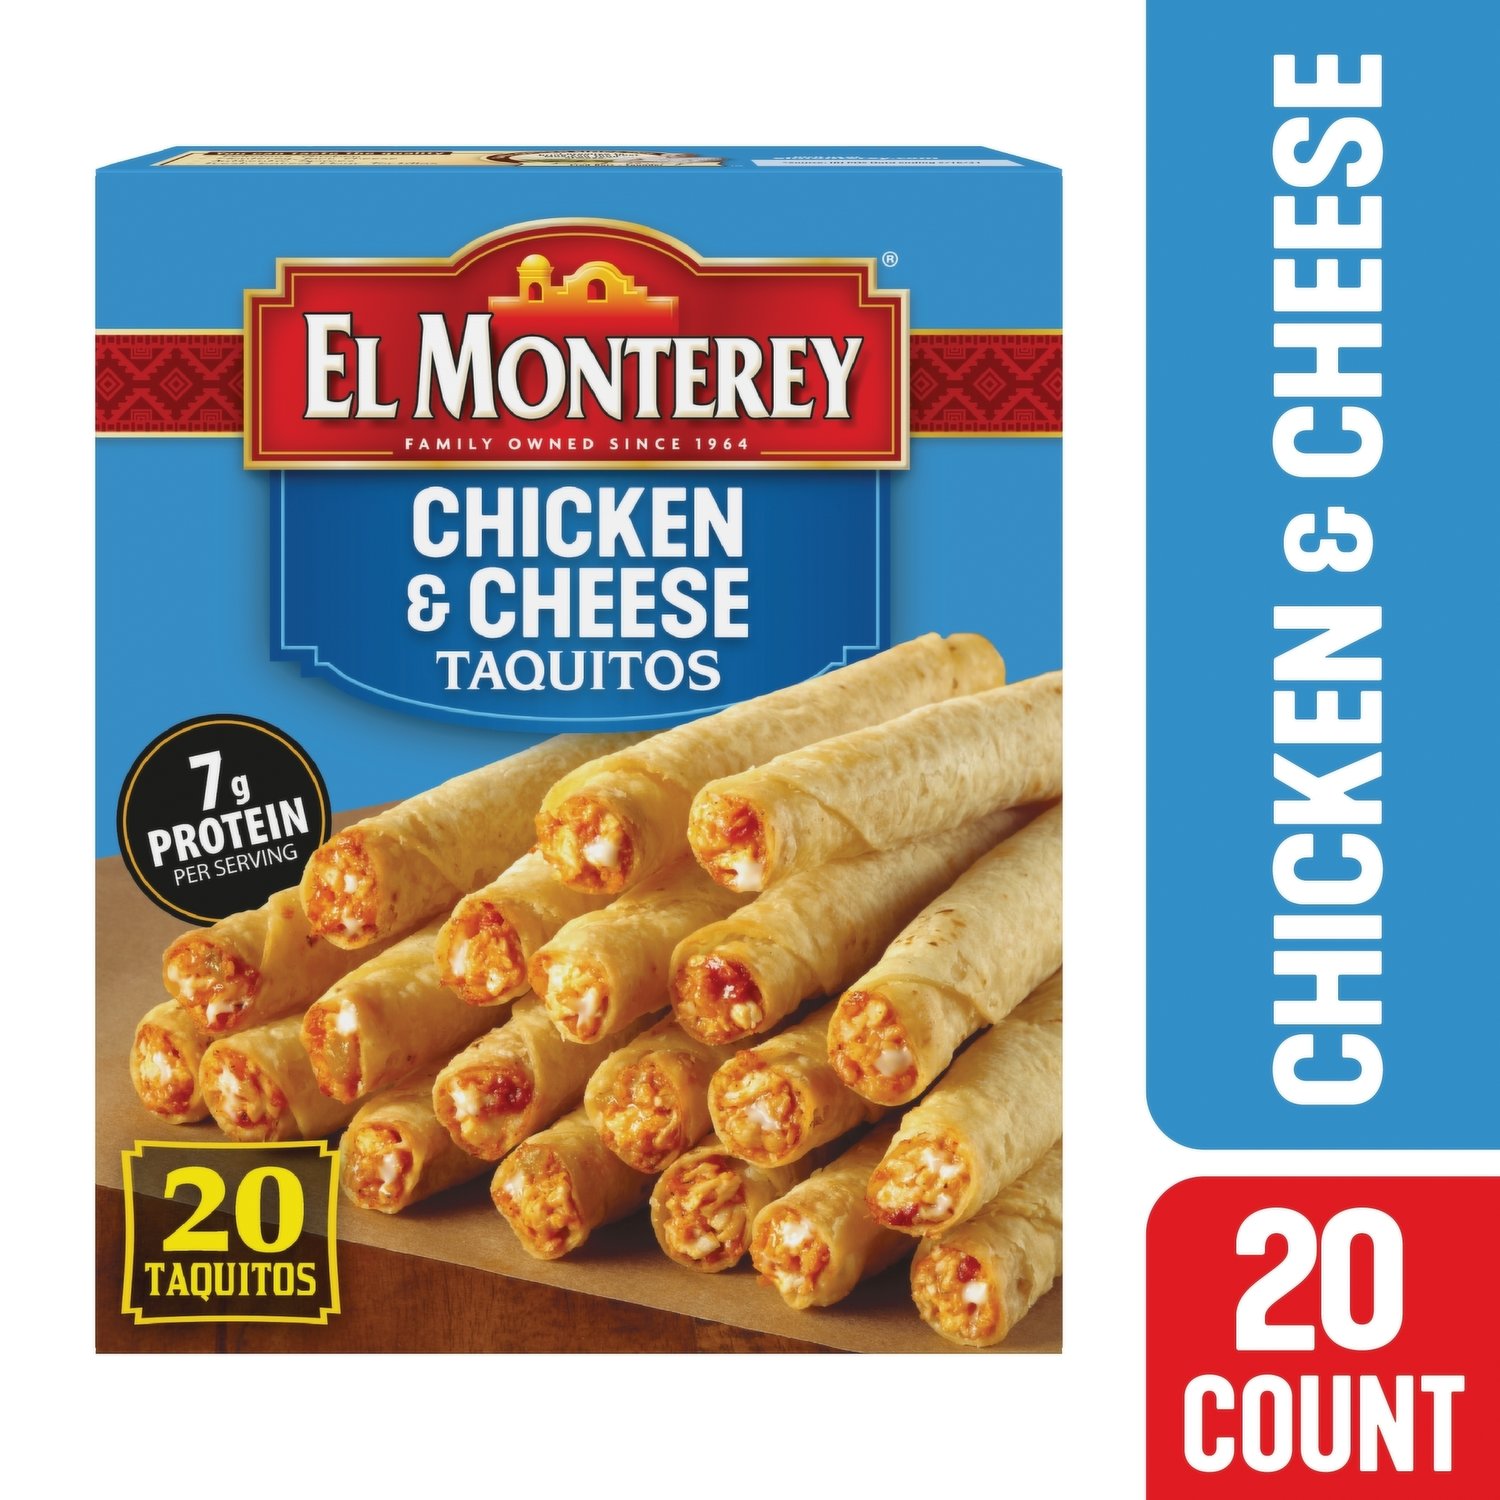 Chung's 12 oz 4 Count Vegetable Egg Roll Carton with Sauce